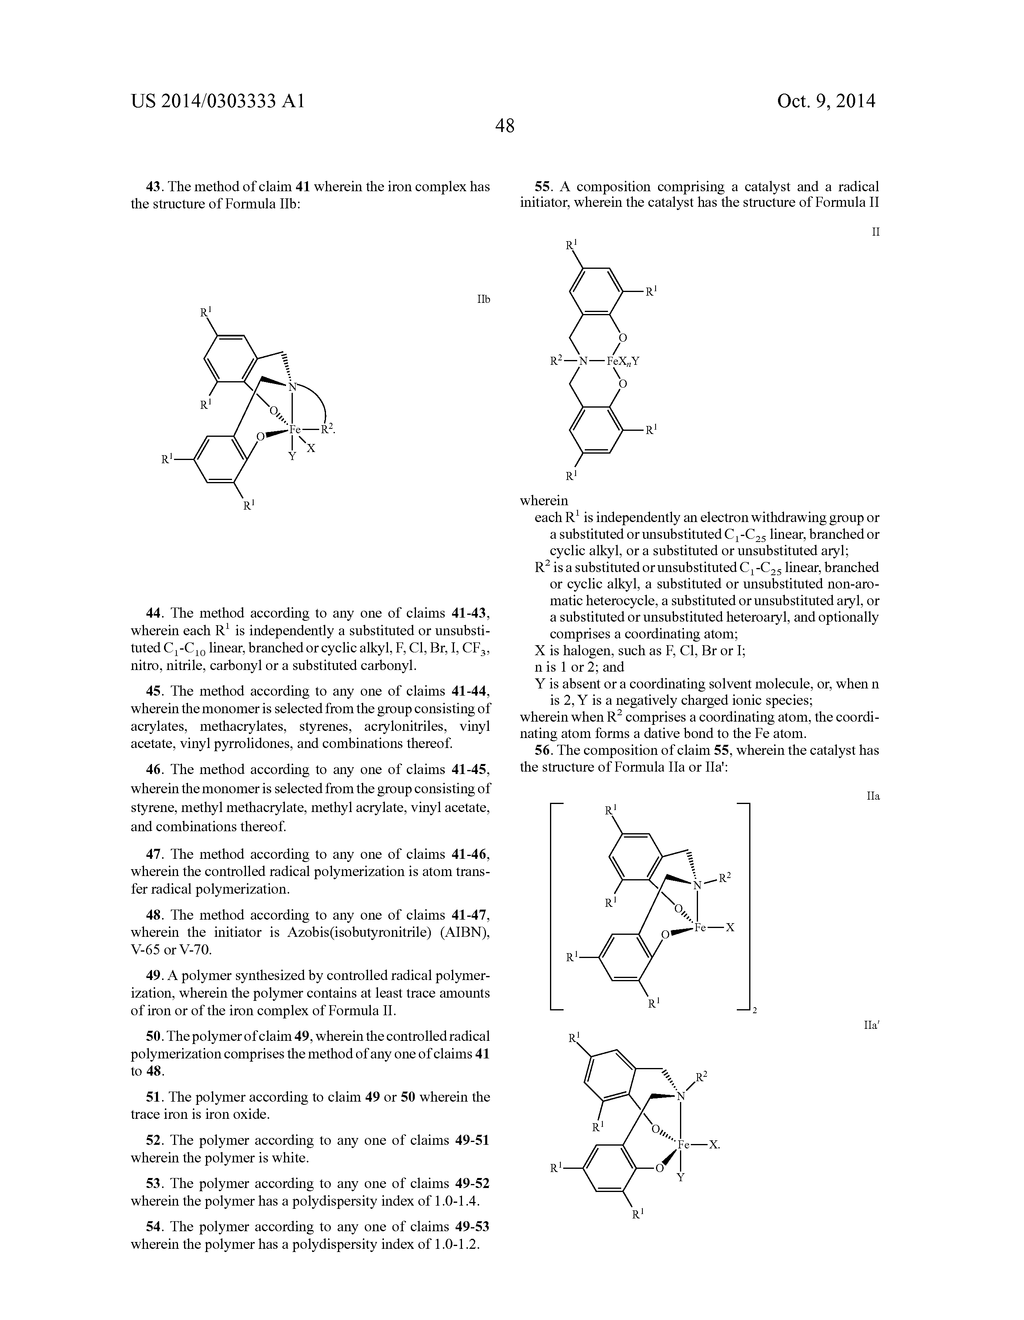 IRON BISPHENOLATE COMPLEXES AND METHODS OF USE AND SYNTHESIS THEREOF - diagram, schematic, and image 72